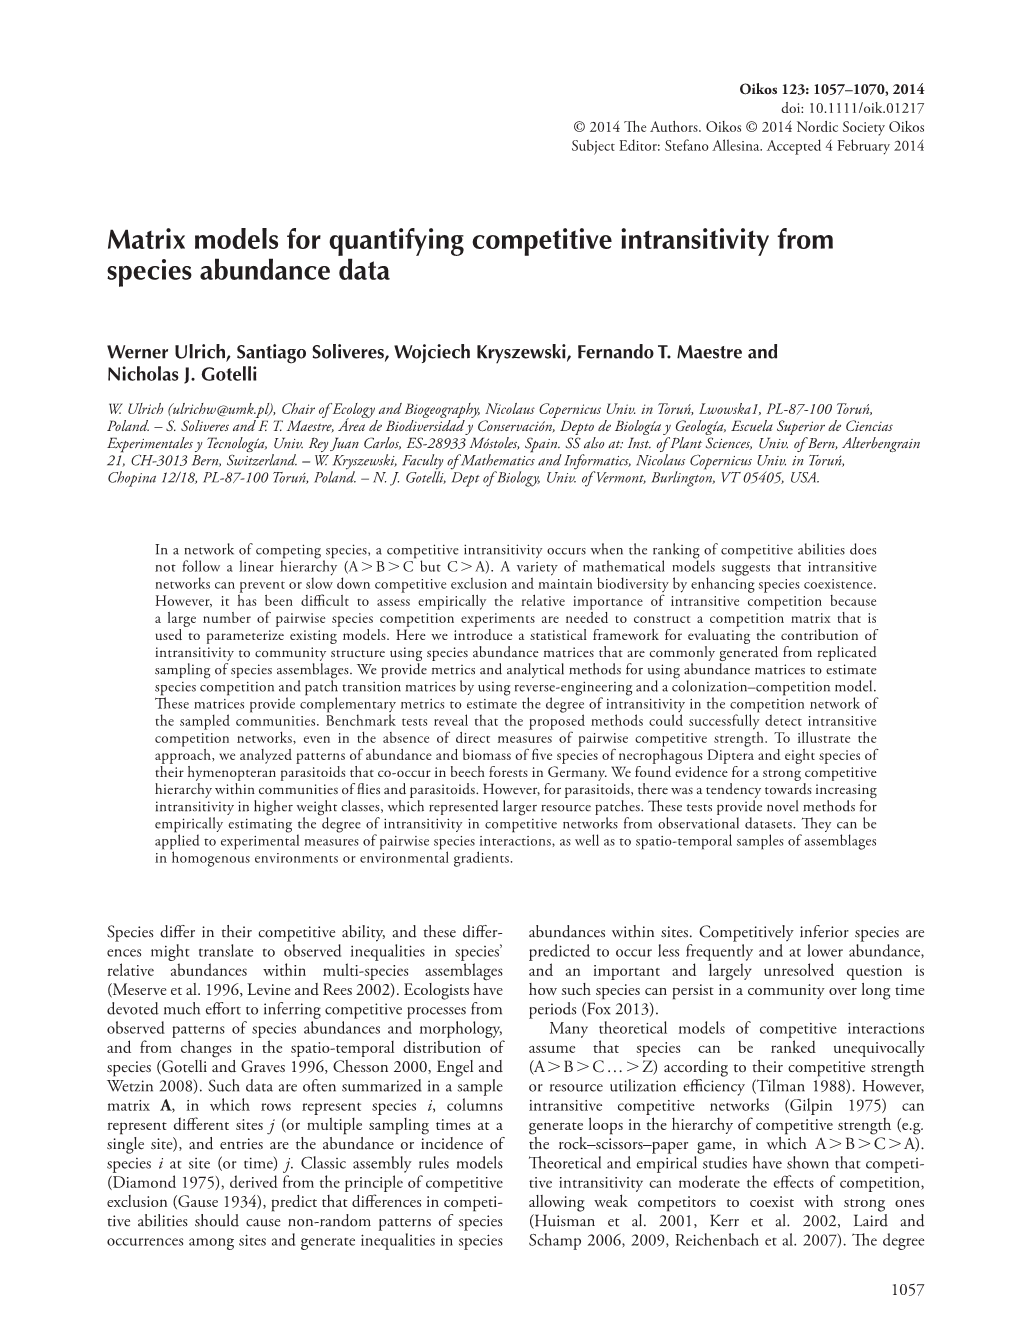 Matrix Models for Quantifying Competitive Intransitivity from Species Abundance Data